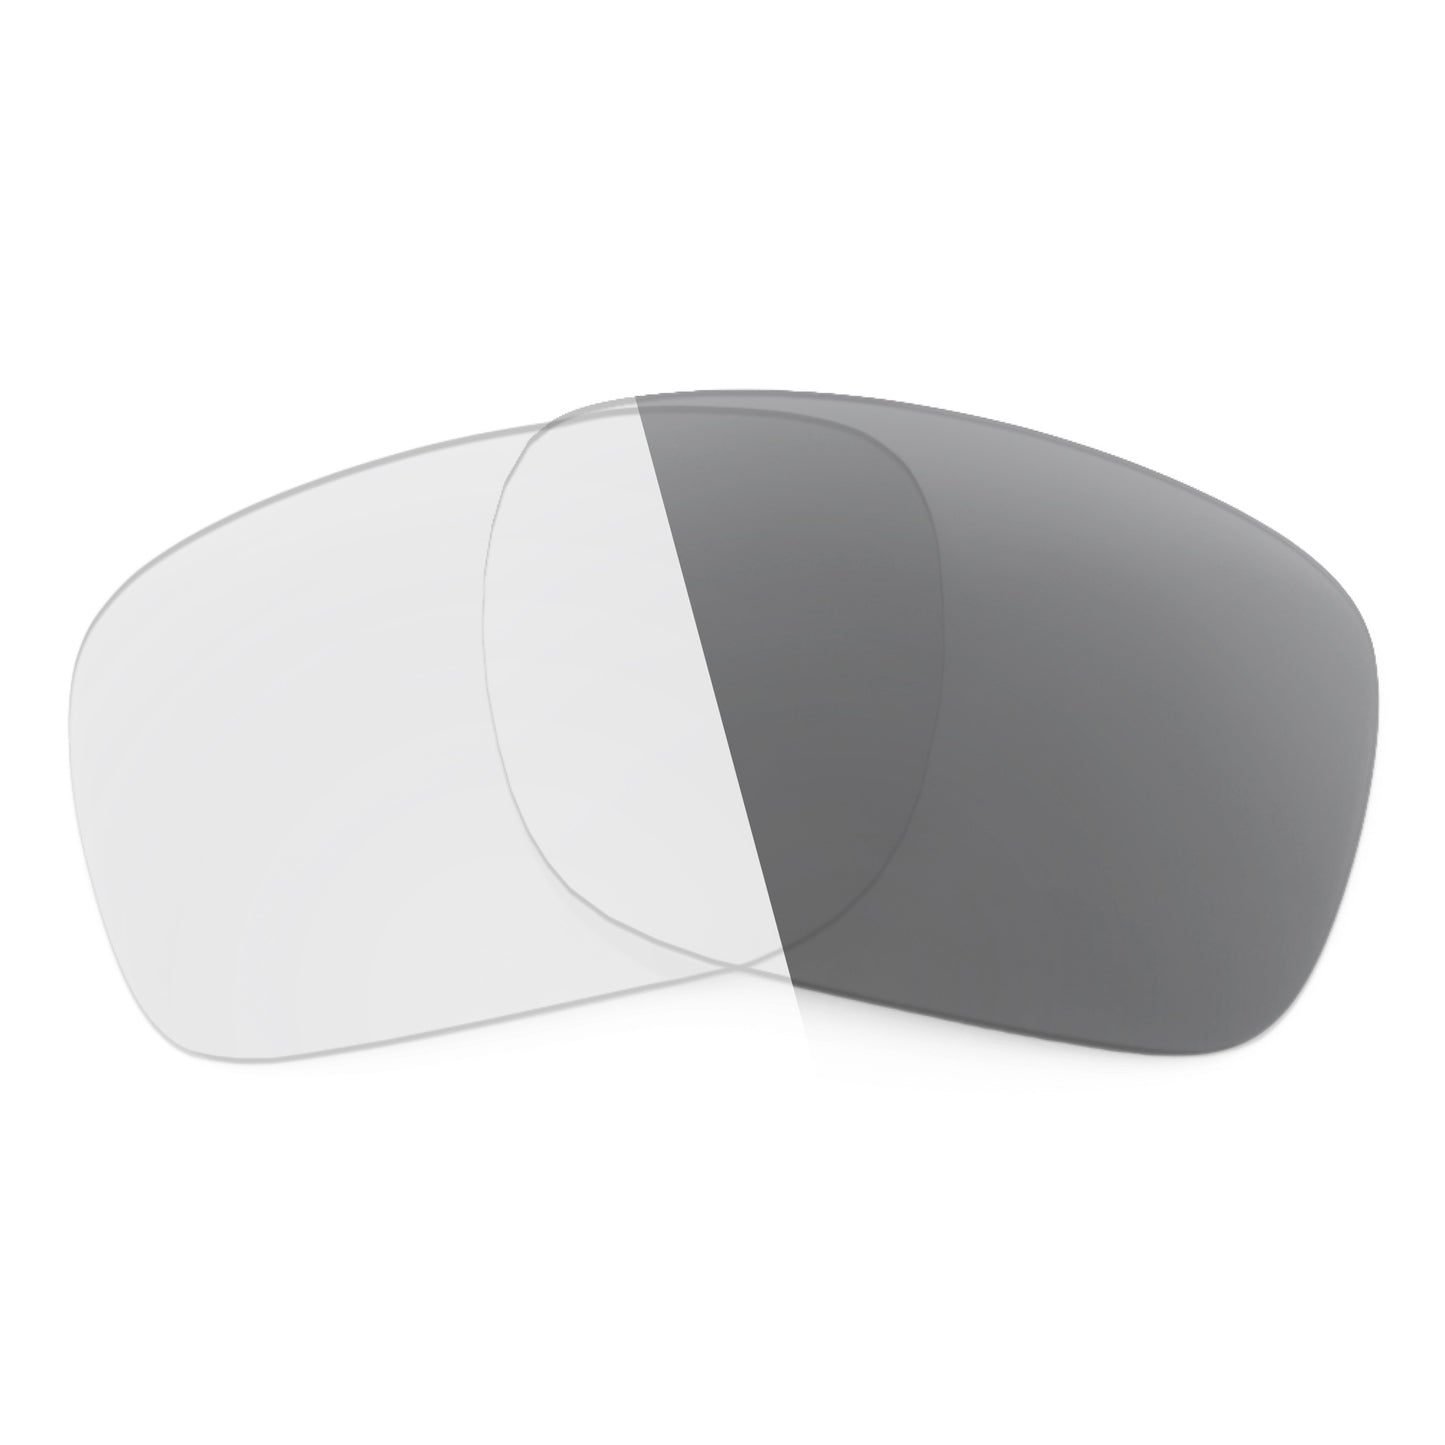 Revant replacement lenses for Ray-Ban RB3522 64mm Non-Polarized Adapt Gray Photochromic